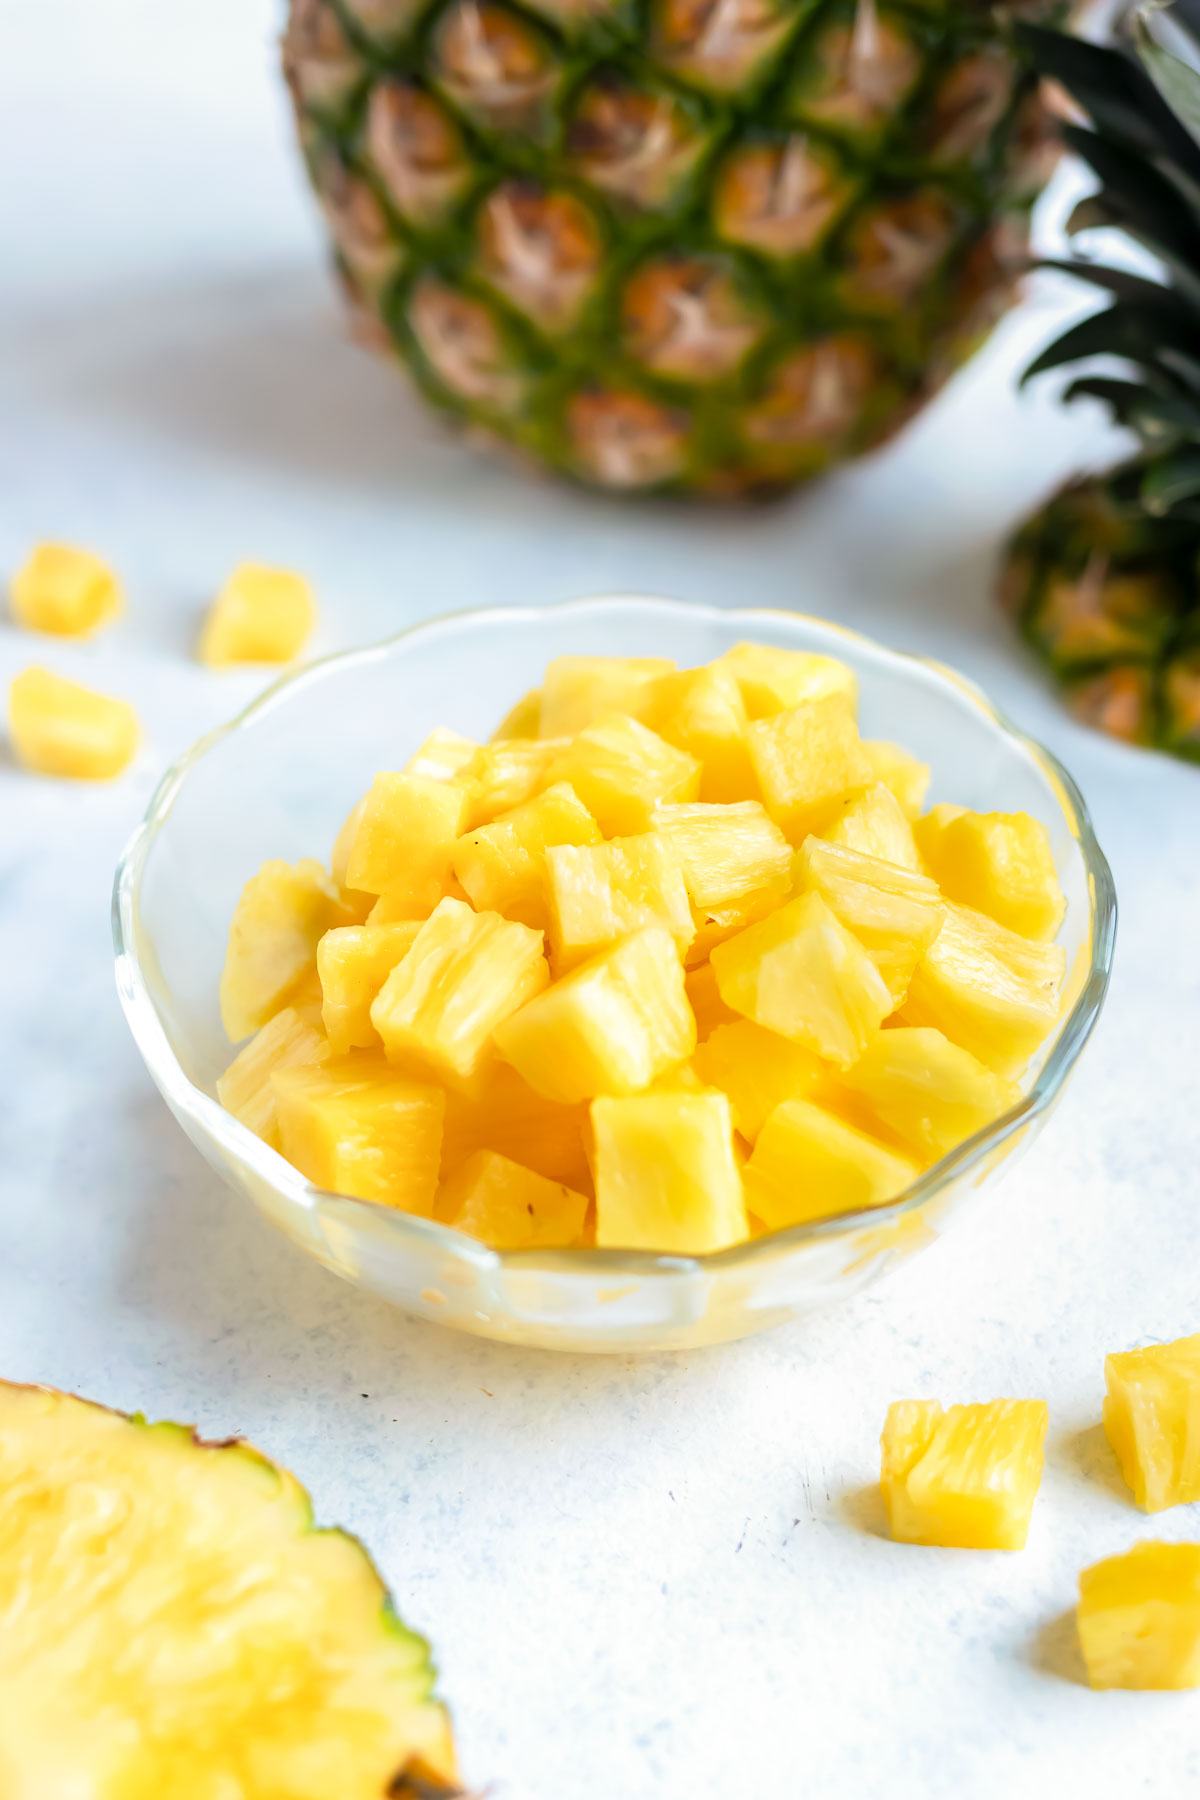 A bowl of pineapple cubes is shown on the counter.